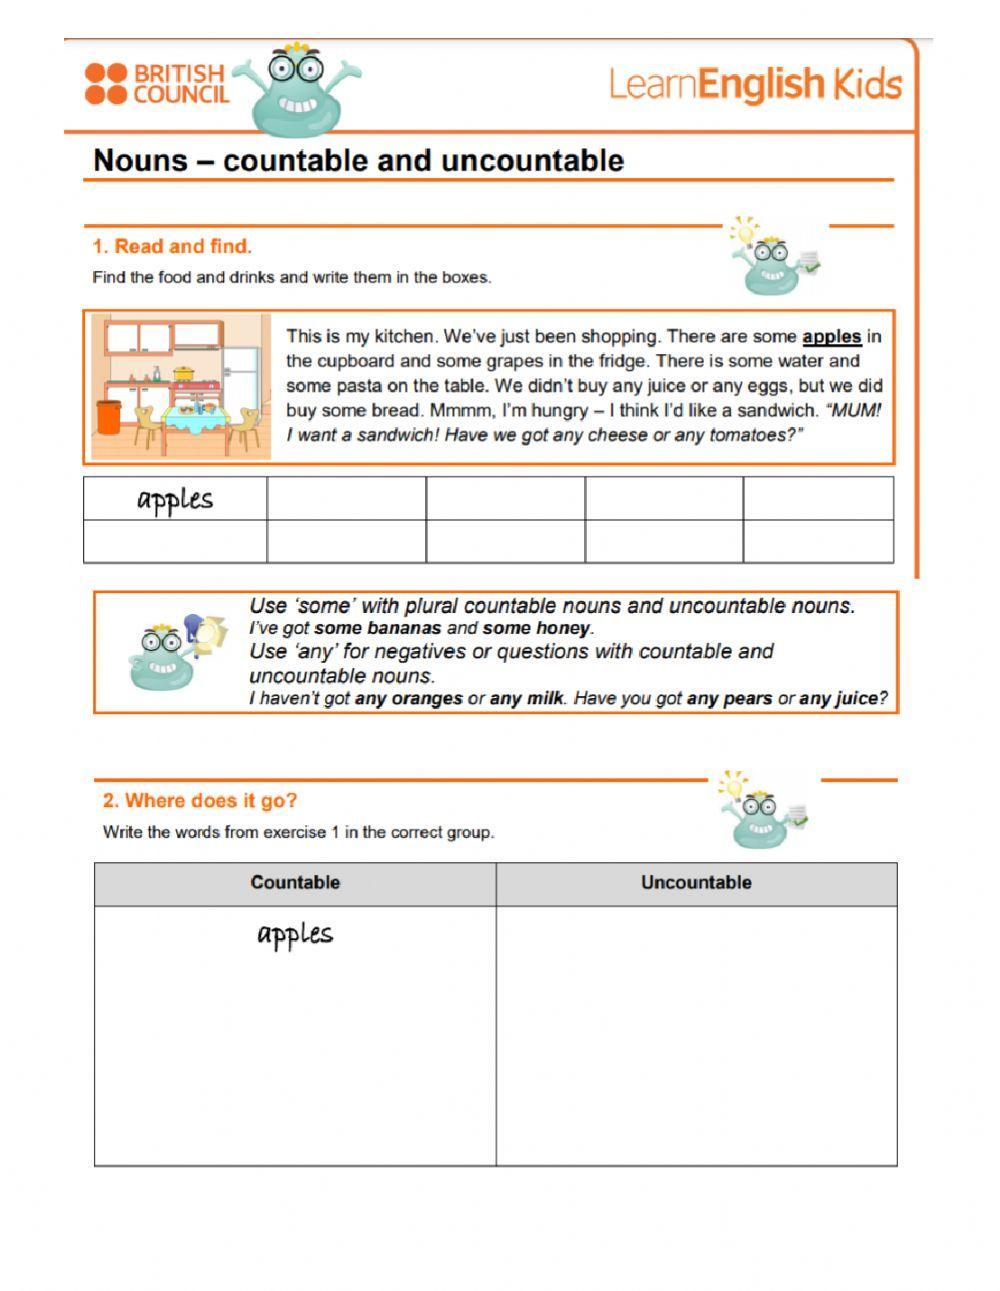 02.countable and uncoutable